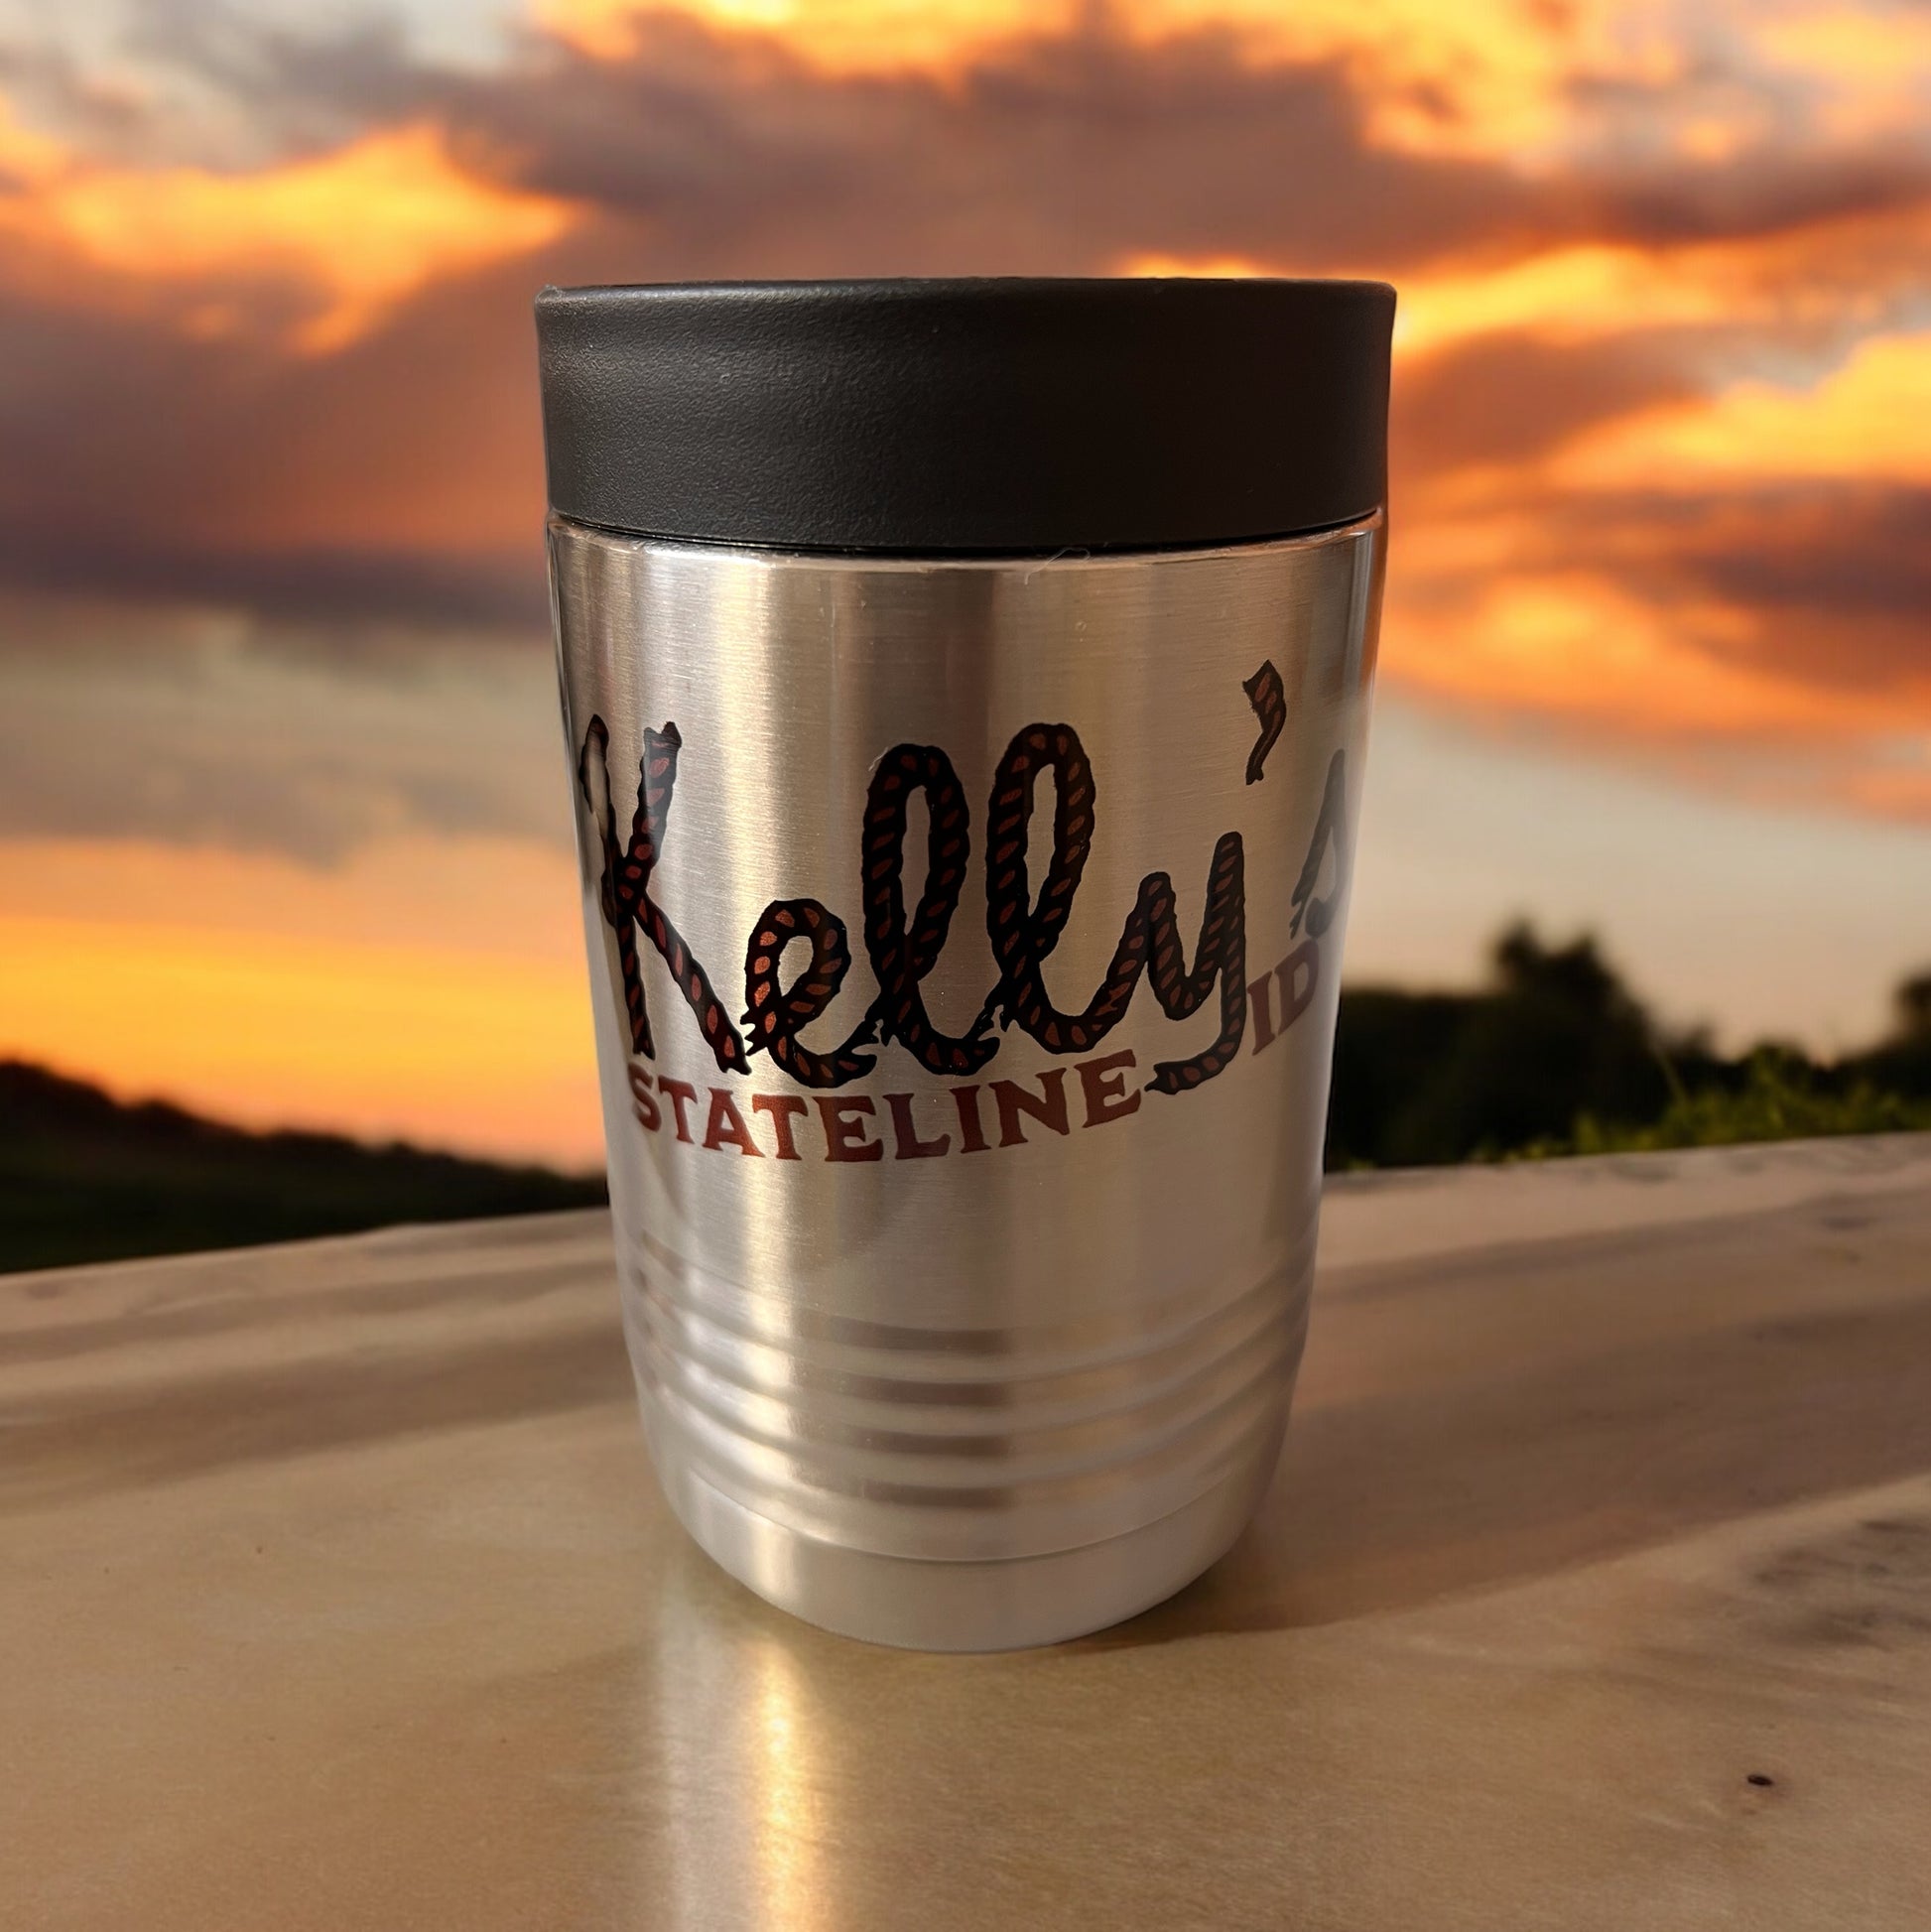  Image of the Kelly Hughes Stateline ID Beverage Holder, featuring a sleek design with the band's logo and an ID slot, perfect for keeping drinks cool at concerts and festivals while enjoying the music.